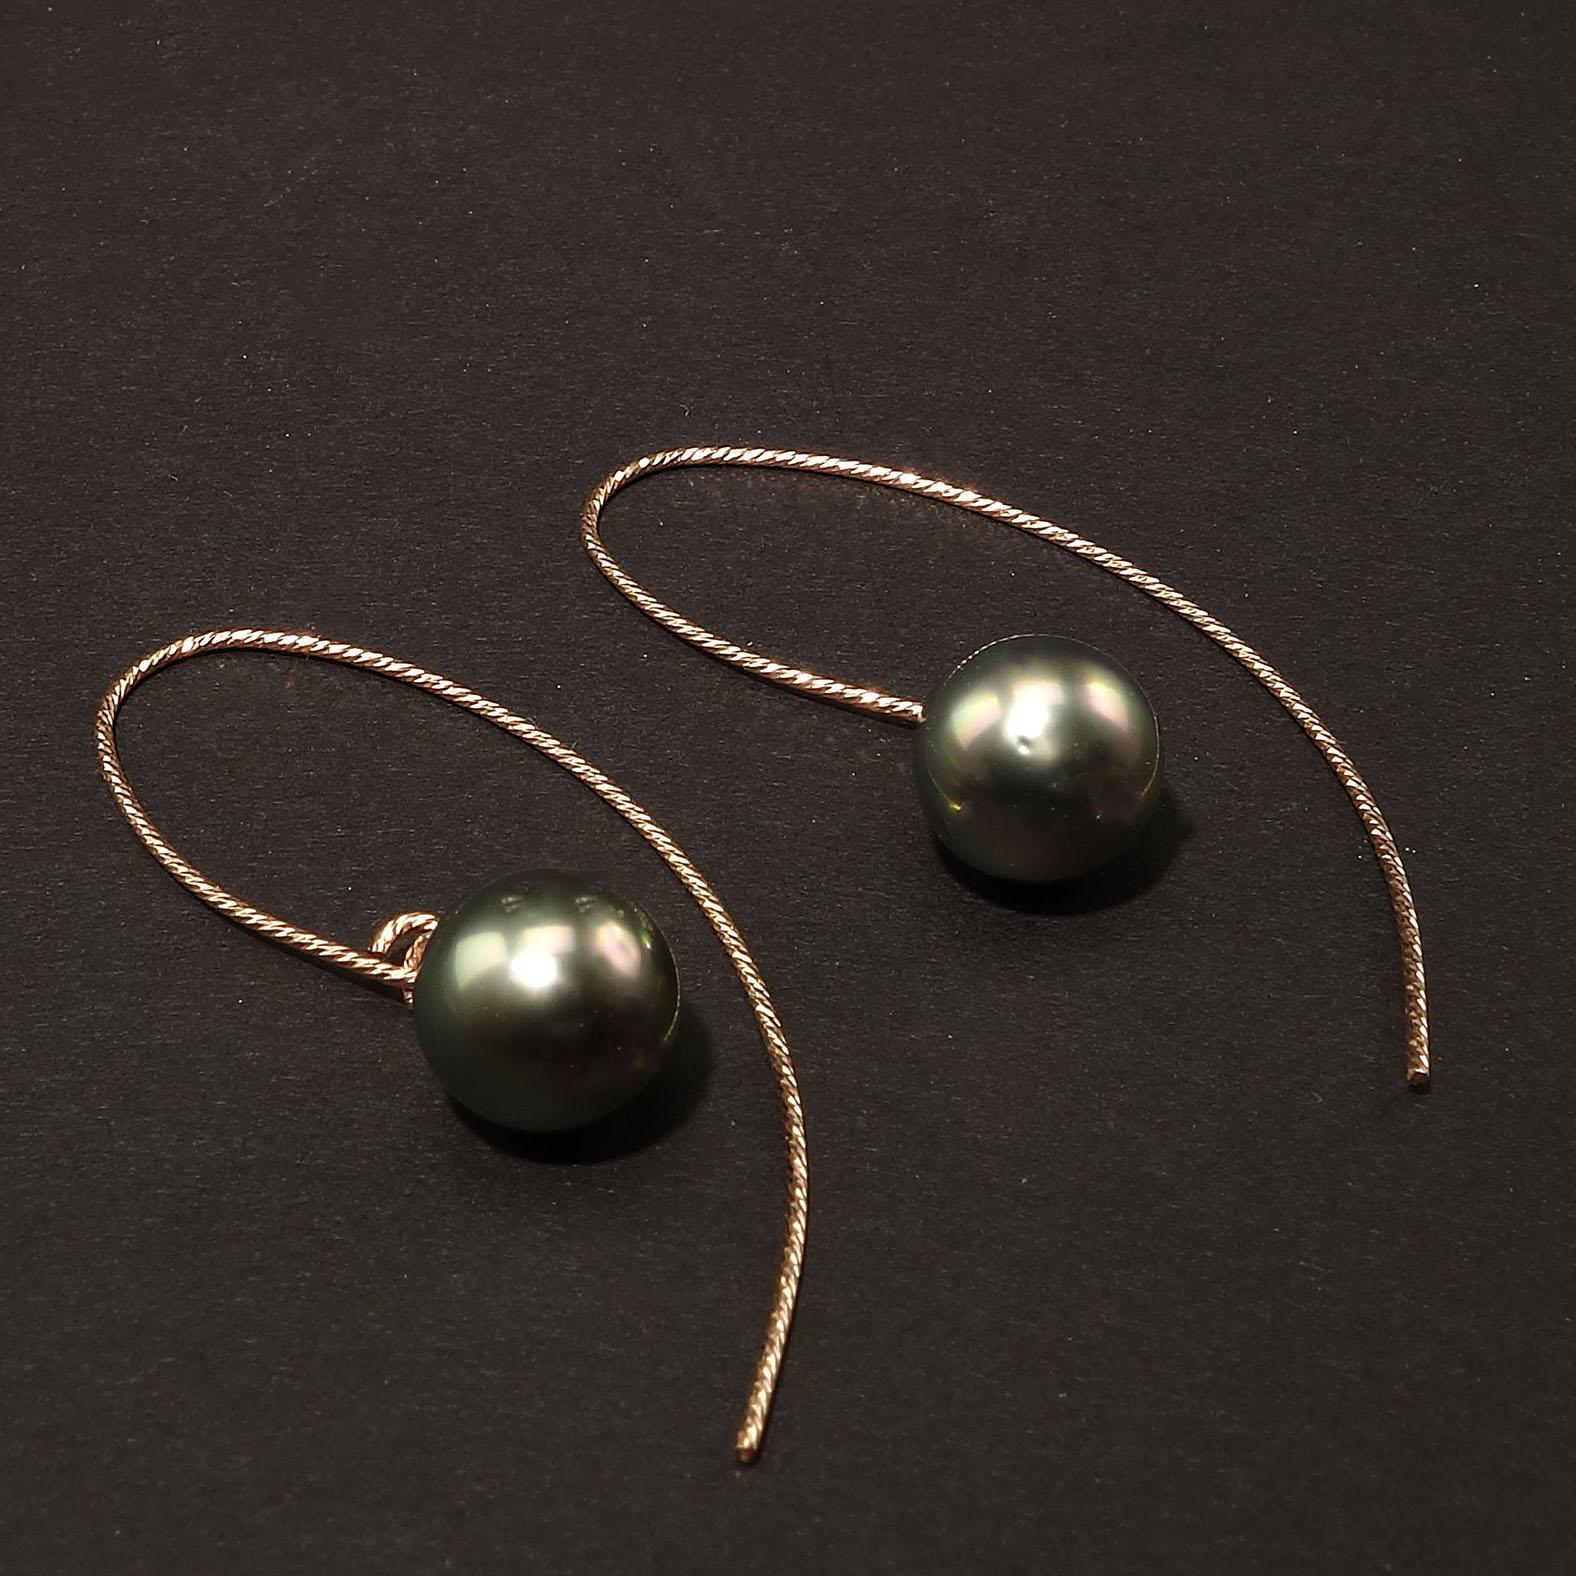 Handmade earrings of gorgeous round iridescent gray pearls dangling from rose Sterling Silver long hooks.  The iridescent gray pearls have flashes pink and green.  The Sterling Silver hooks are twisted and sparkly.  These pearl earrings are